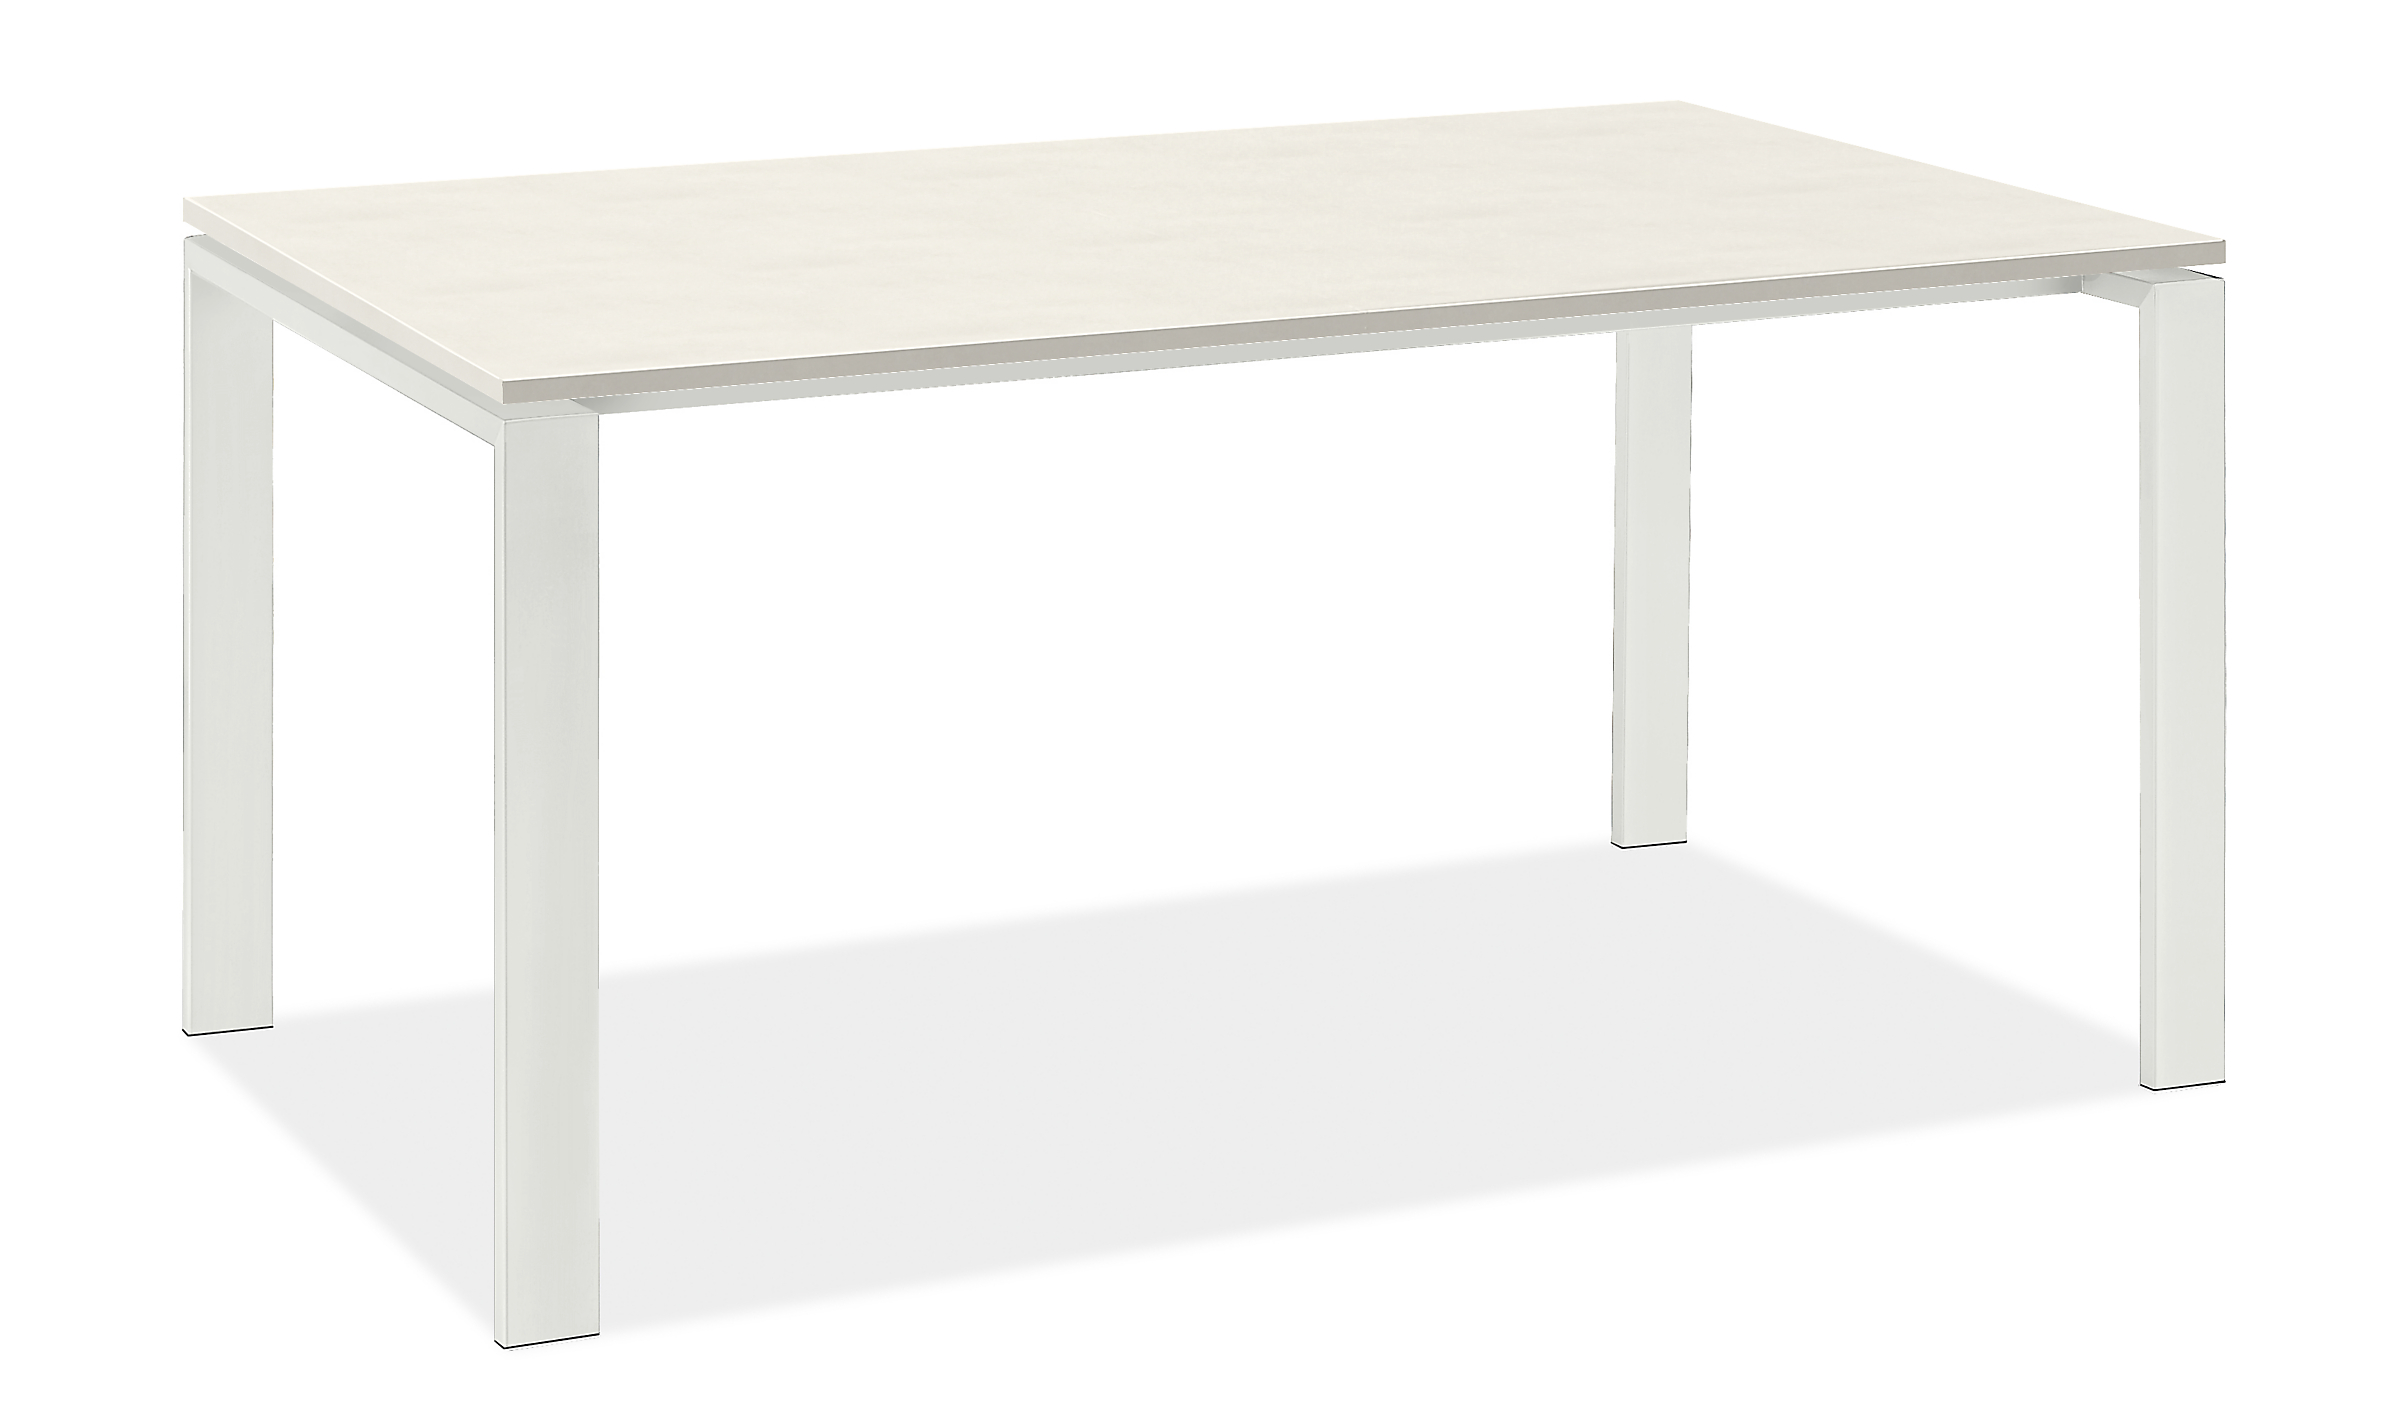 Rand 64w 36d 35h Counter Table in White with Marbled White Quartz Top